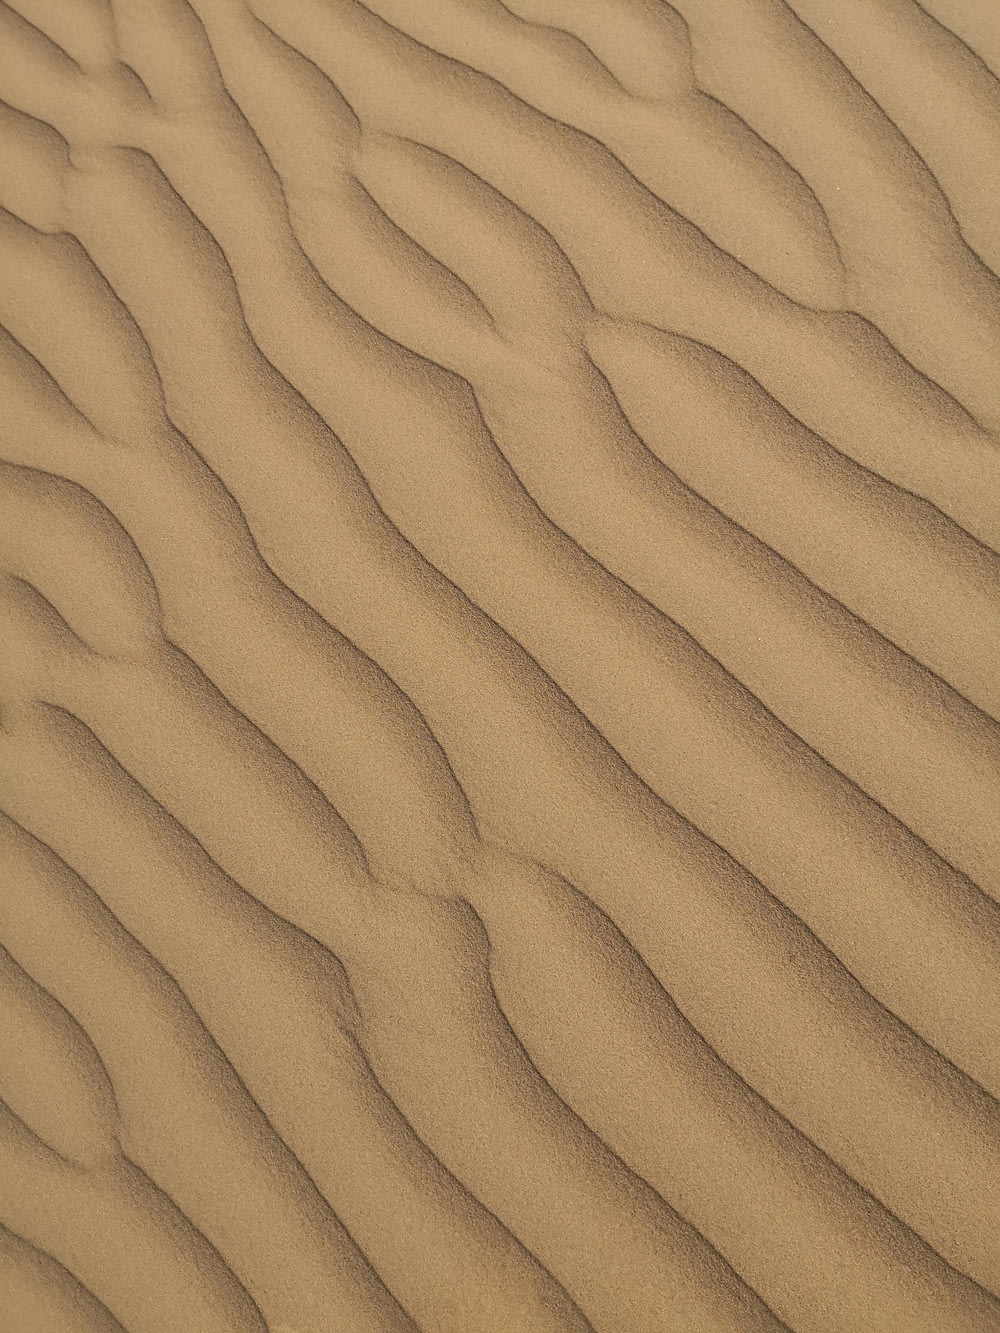 a sand dune with wavy lines in the sand